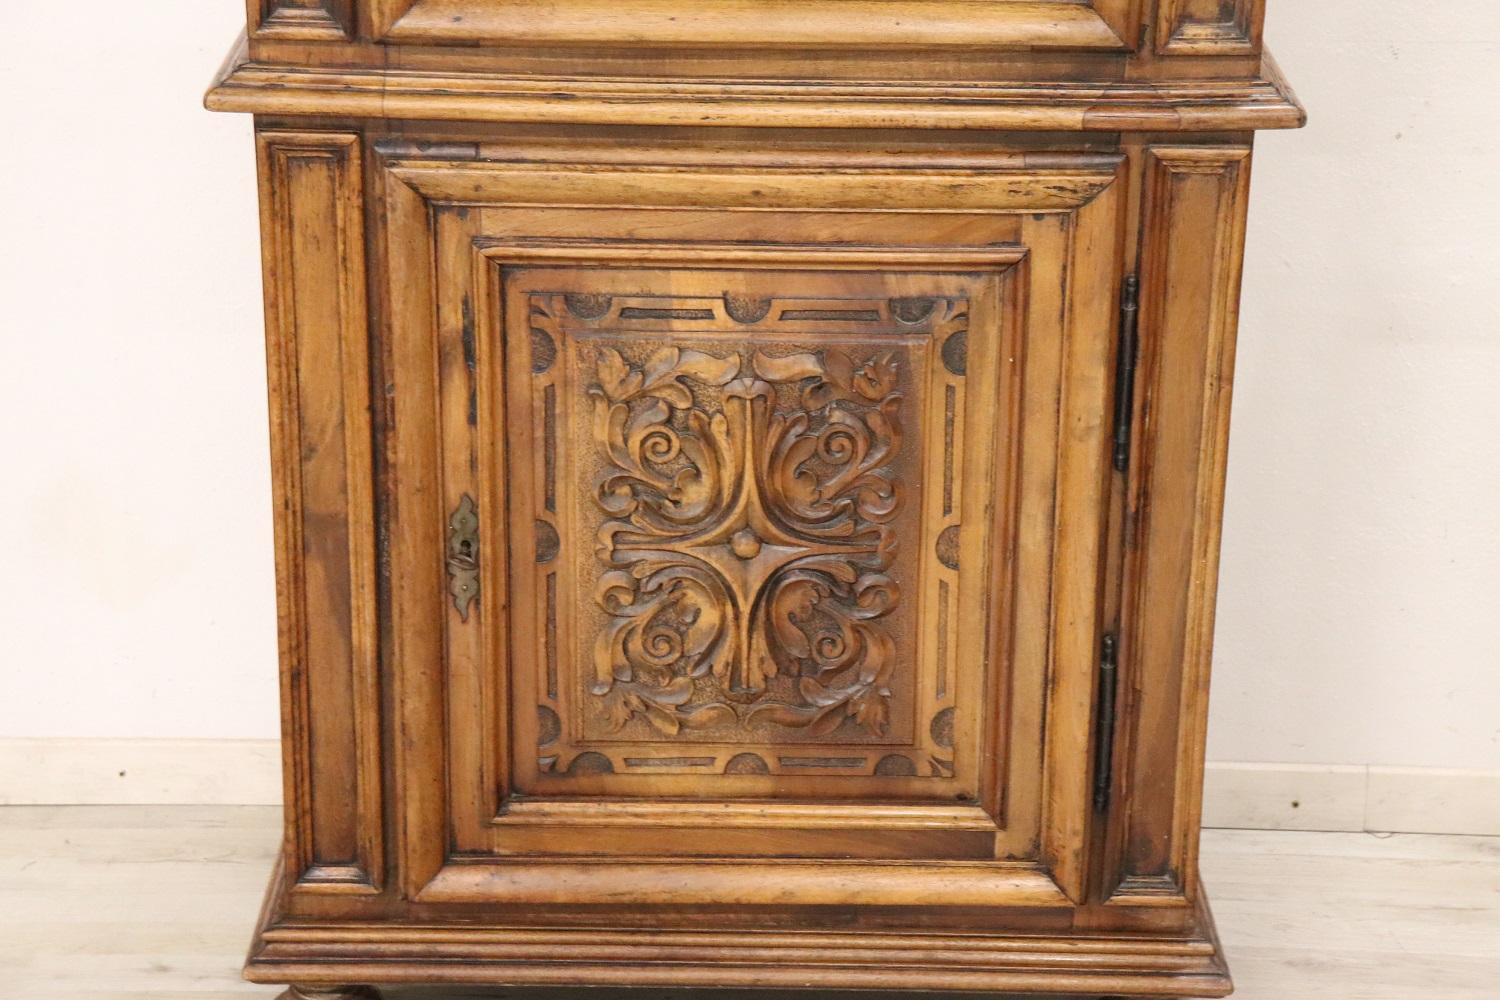 Important and rare antique solid walnut small cabinet, 19th Century. Characterized by a refined hand carving of the wood on the front doors. The Fine walnut wood has acquired a beautiful old patina. This cabinet splits into two parts for convenient